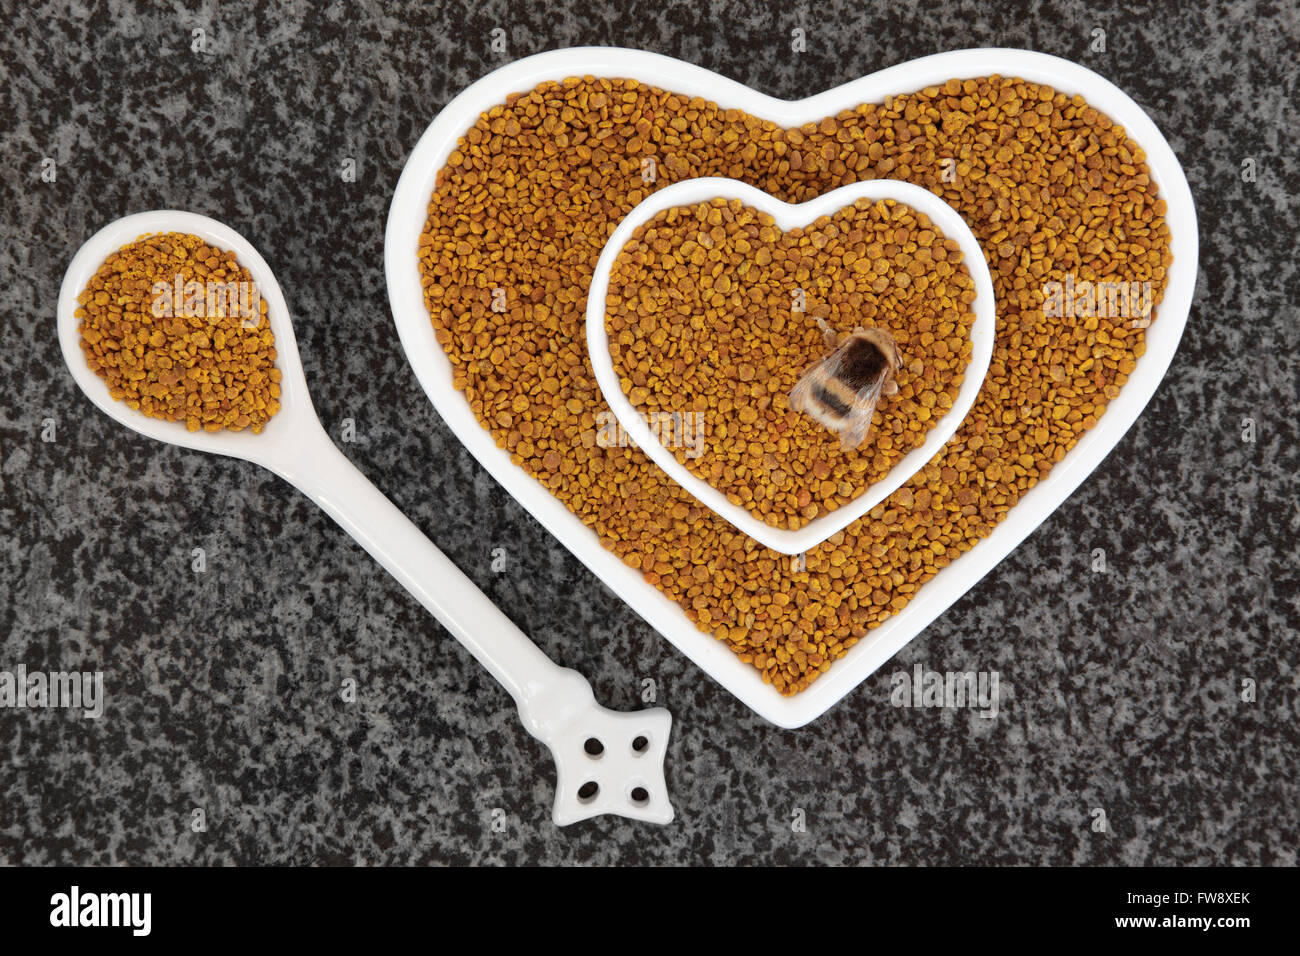 Bee pollen grain super food supplement in scoop and heart shaped dishes with bumblebee over marble background. Stock Photo